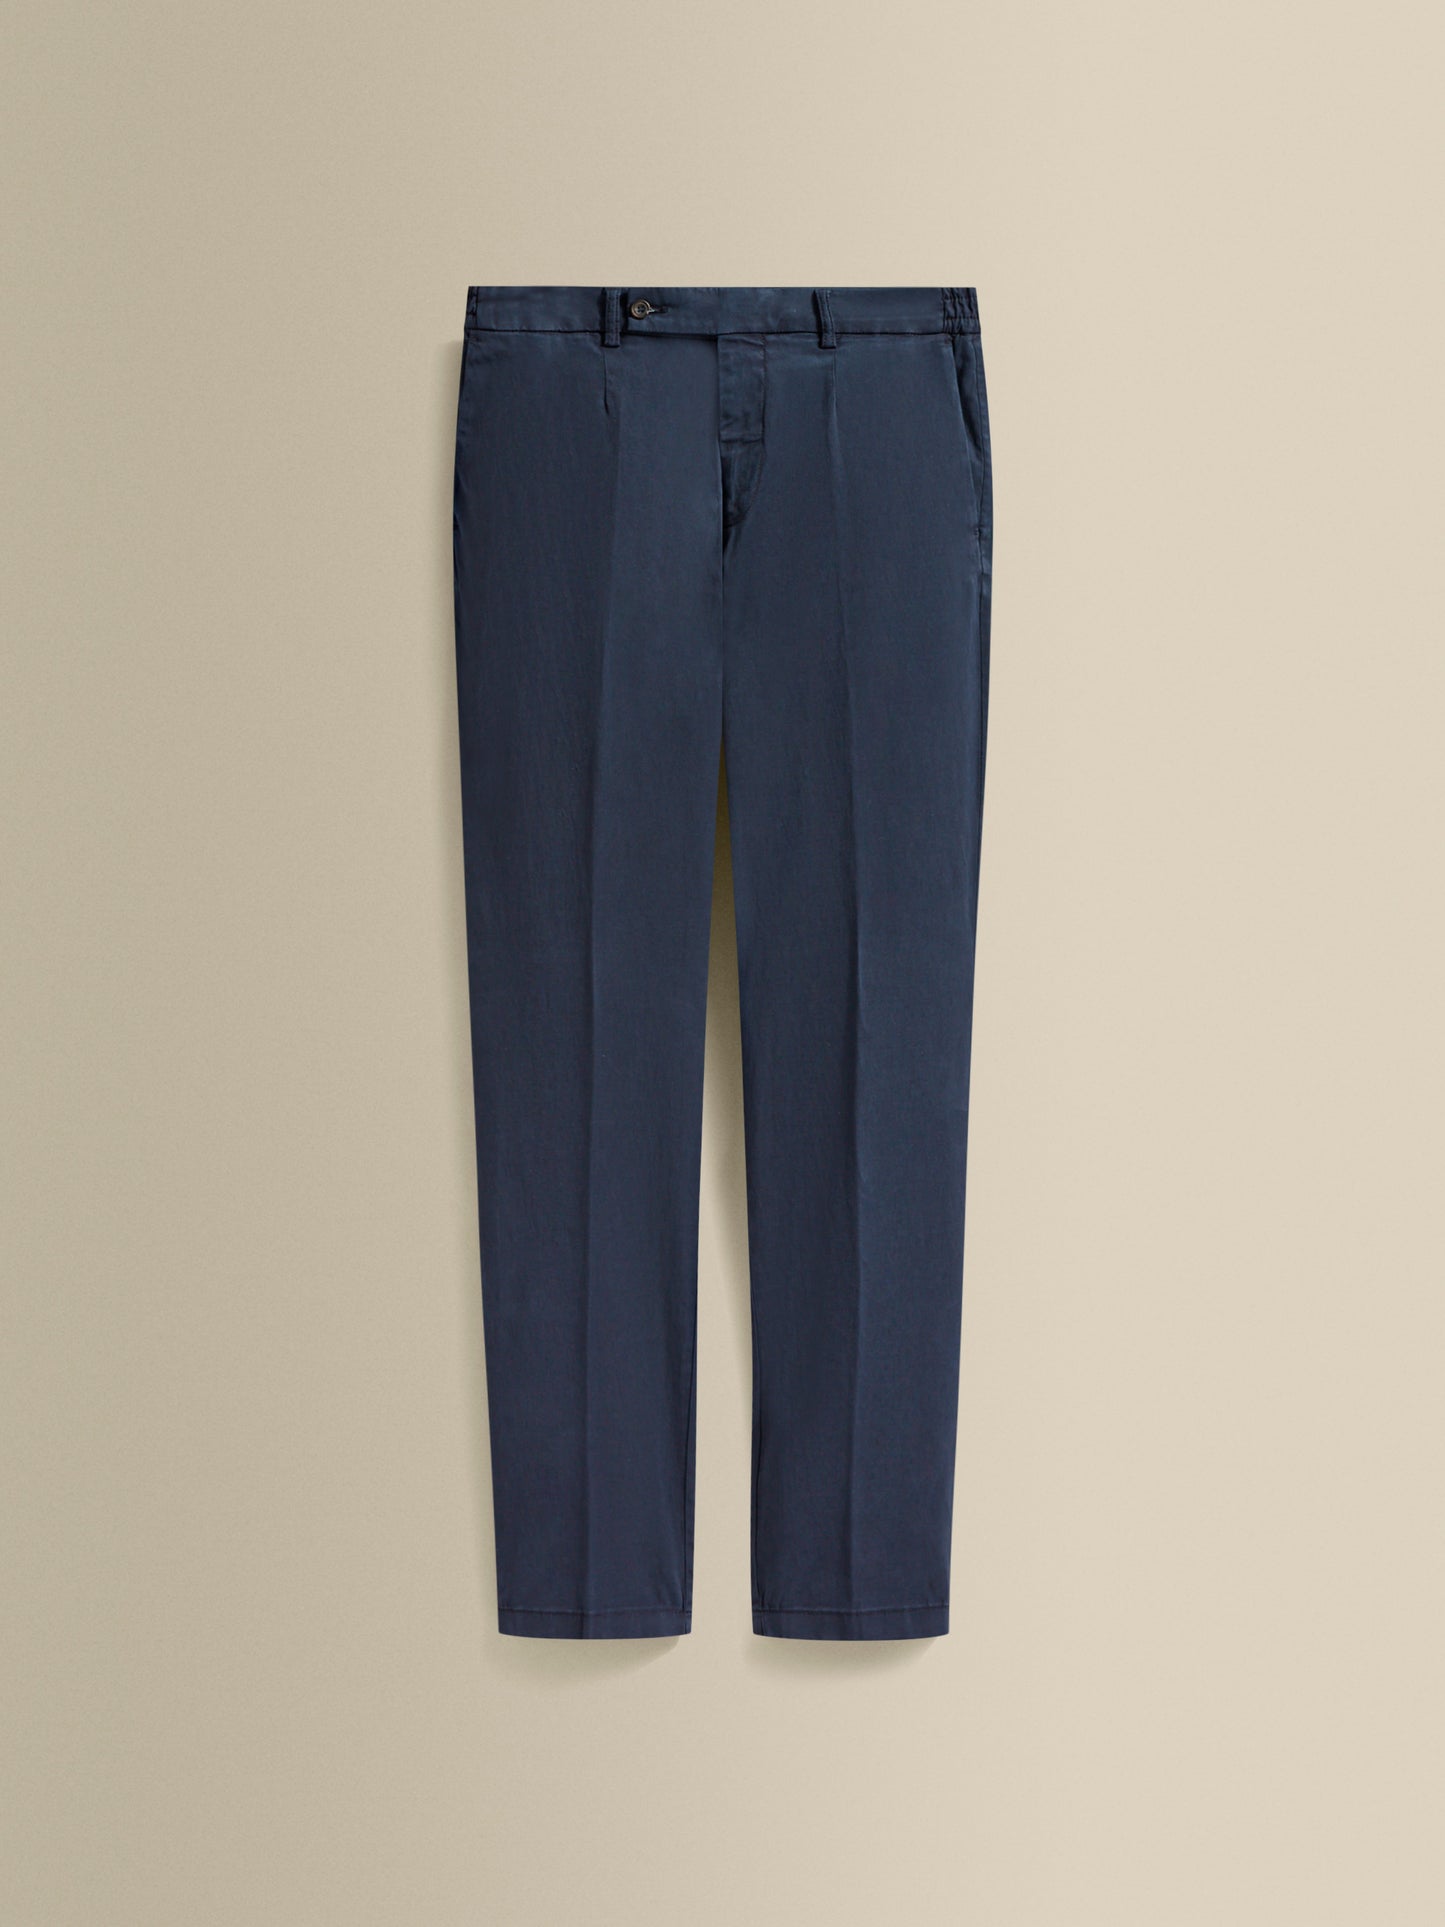 Cotton Easy Fit Flat Front Chinos Navy Product Image